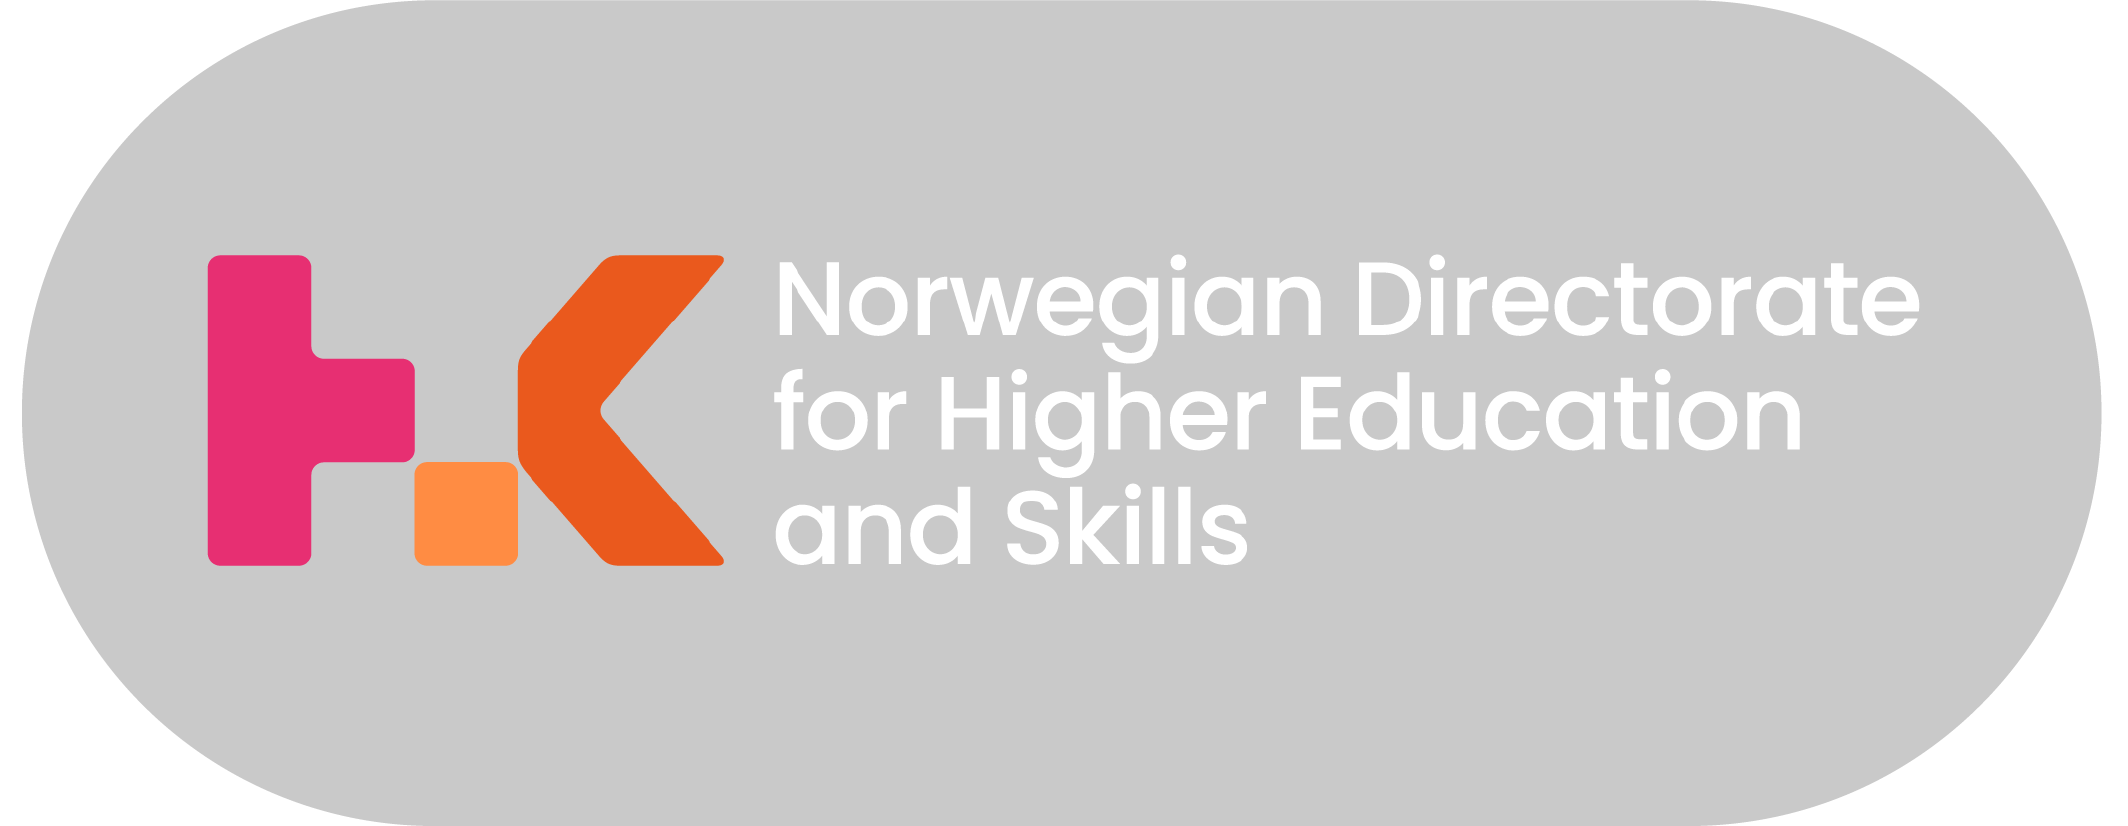 Norwegian Directorate for Higher Education and Skills